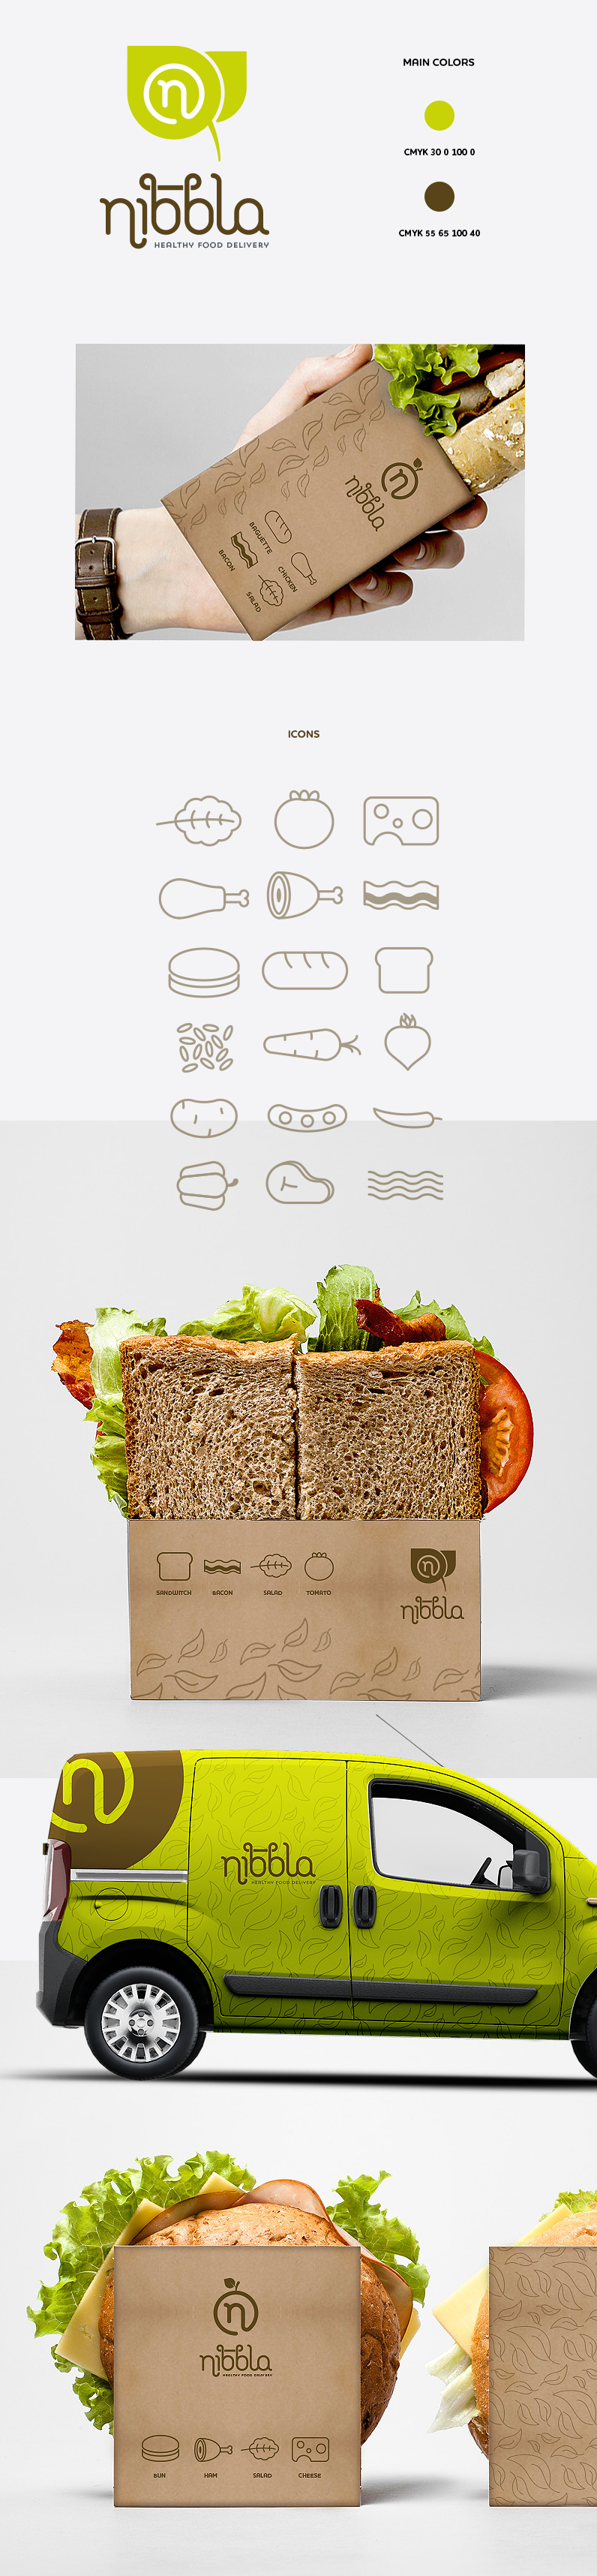 corporate identity for food brand